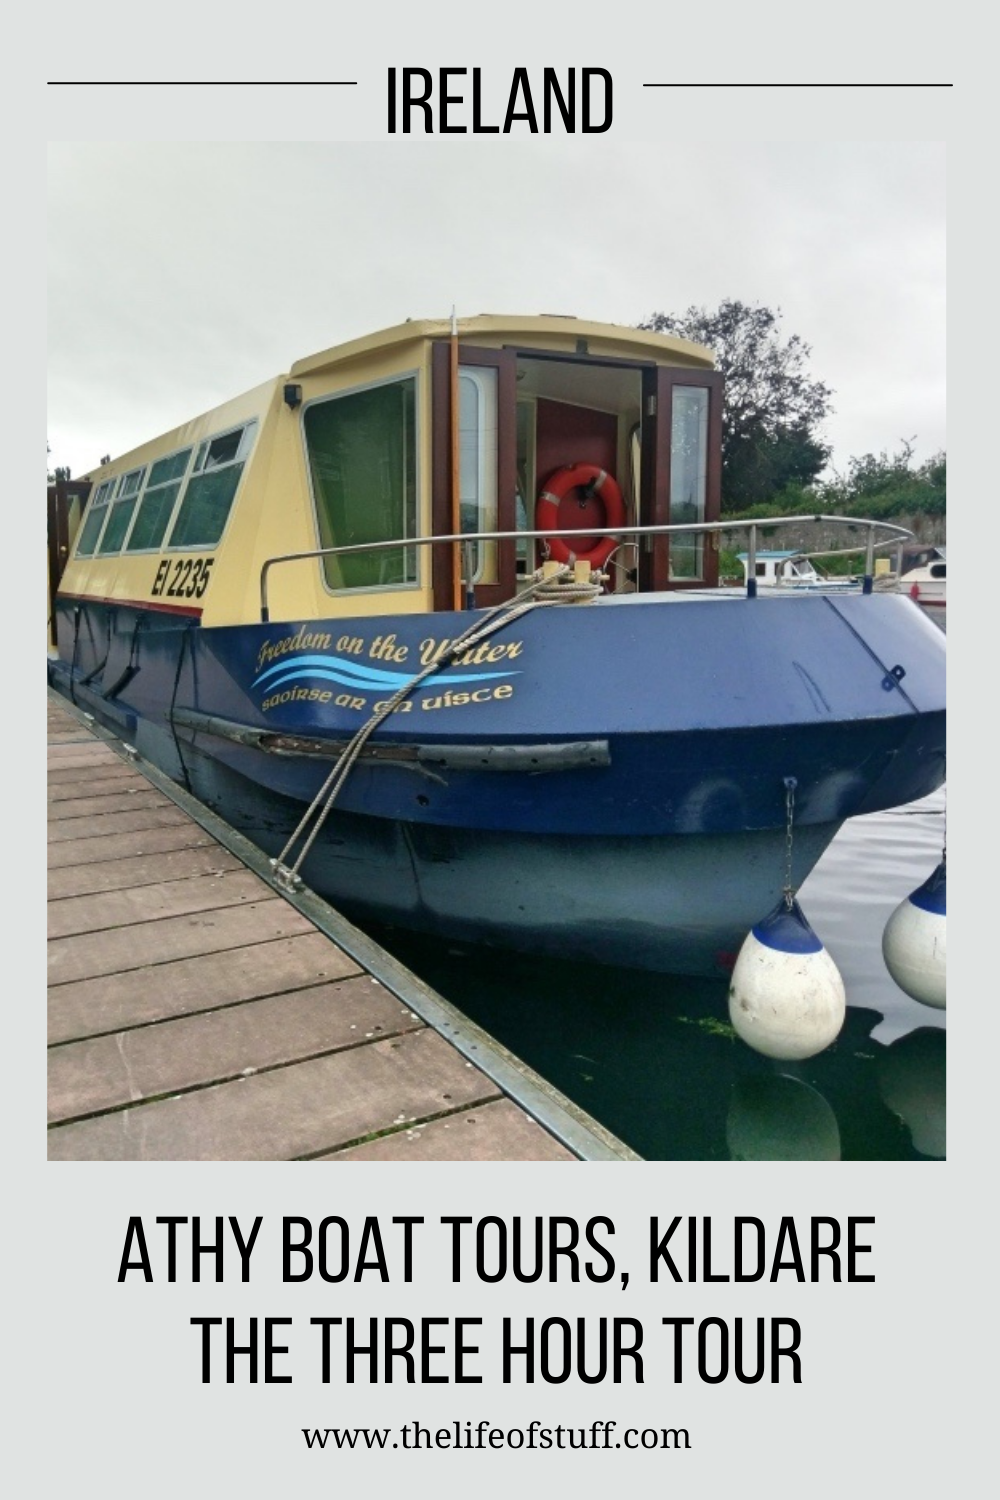 Athy Boat Tours, Kildare, Ireland - The Three Hour Tour - The Life of Stuff